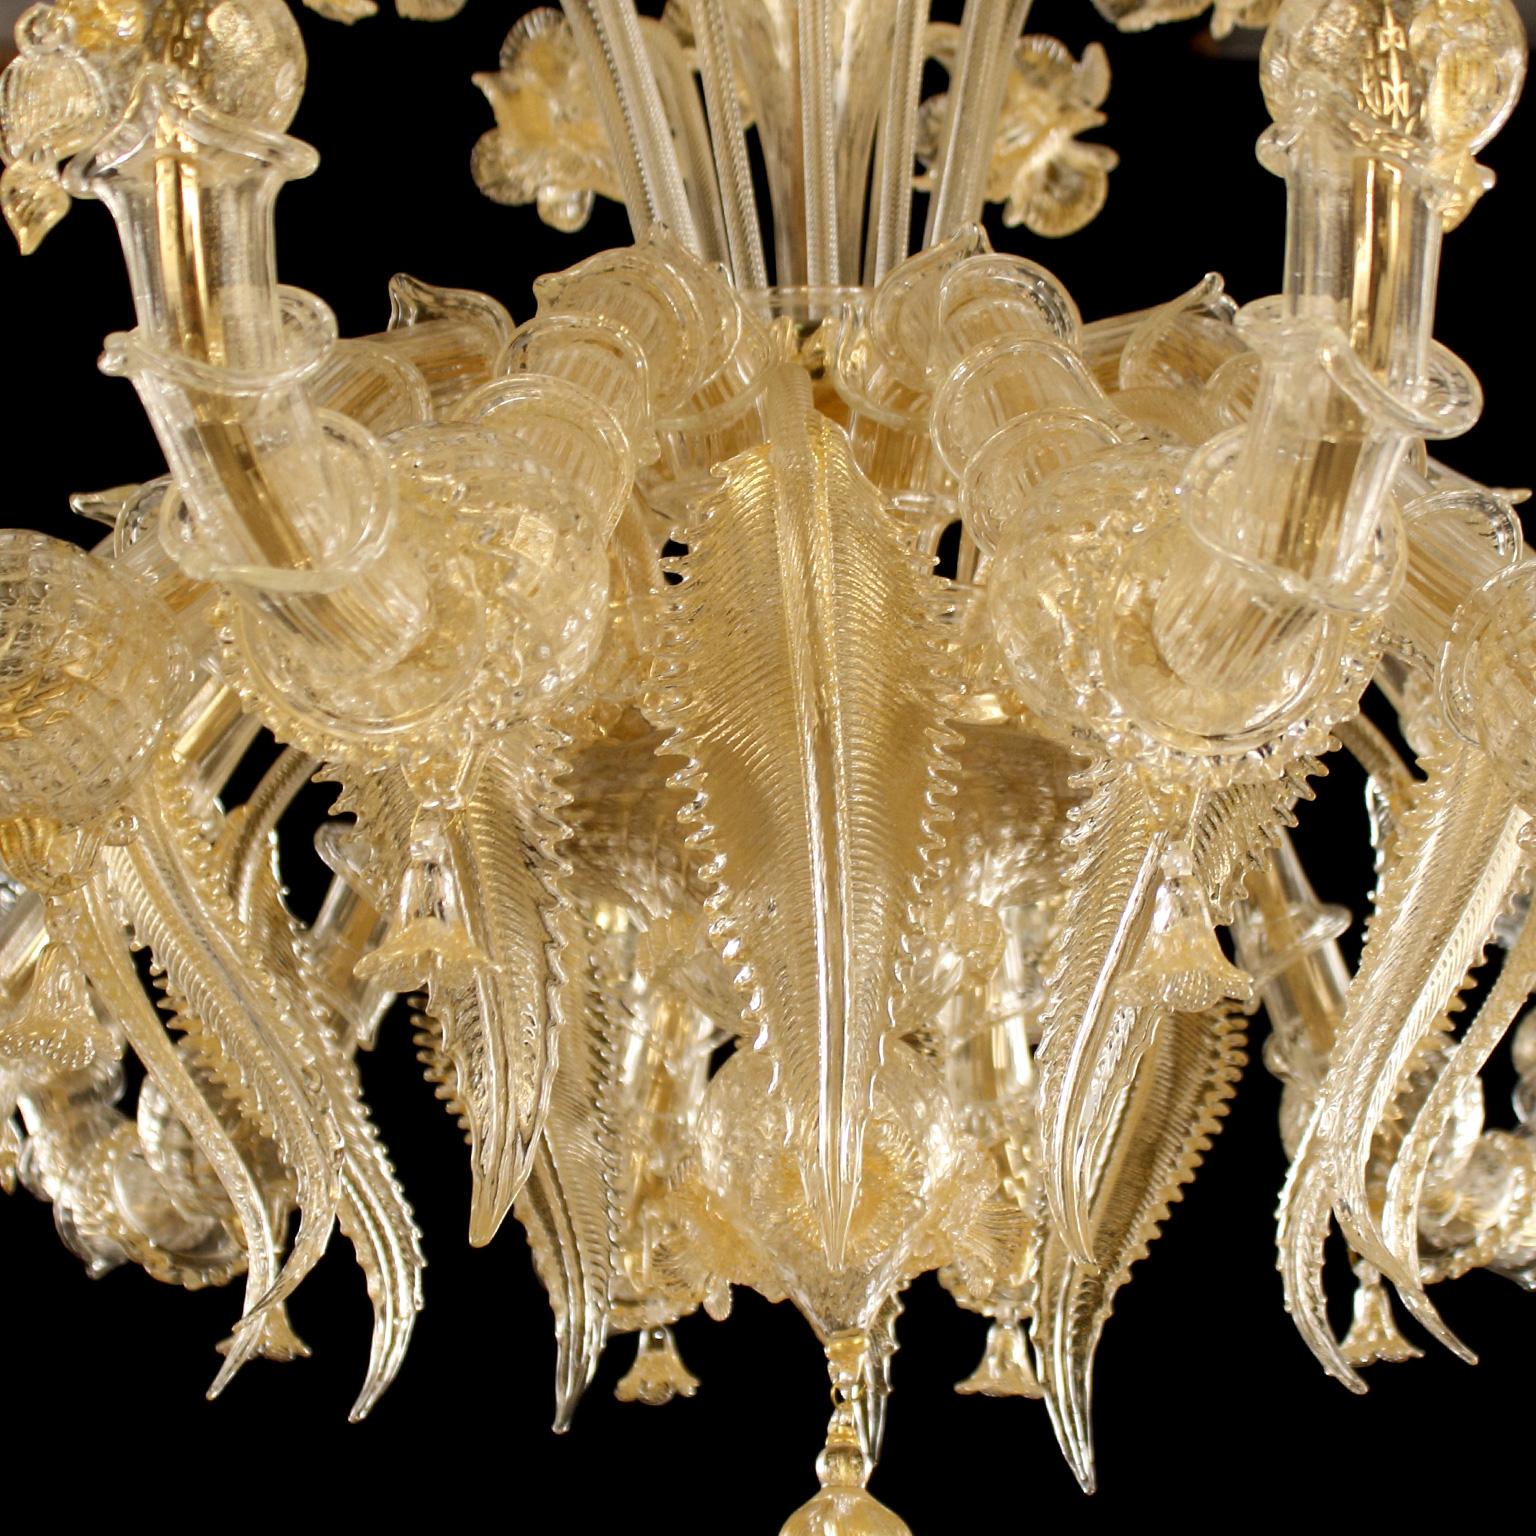 Italian Luxury Artistic Rezzonico Chandelier 12 Arms Gold Murano Glass by Multiforme For Sale